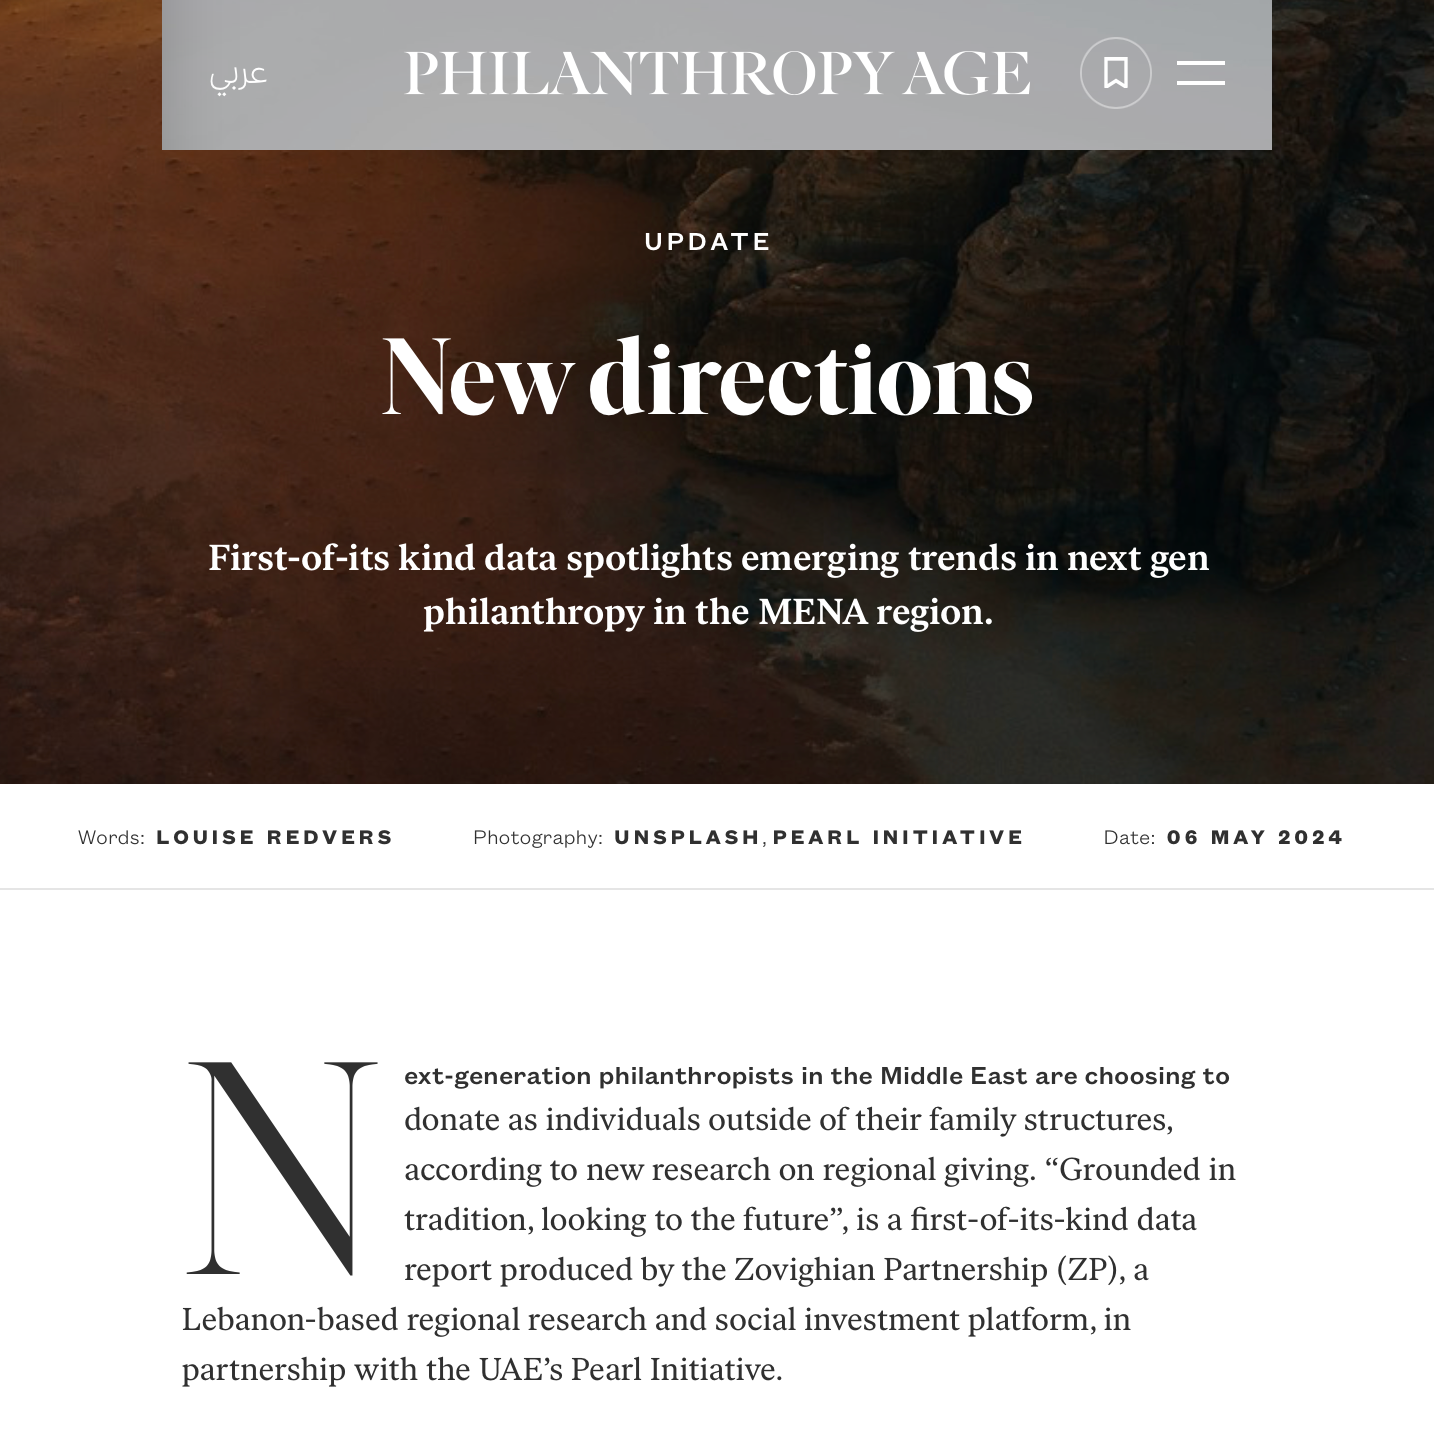 A website called philanthropy age shows a page about new directions in next-gen philanthropy